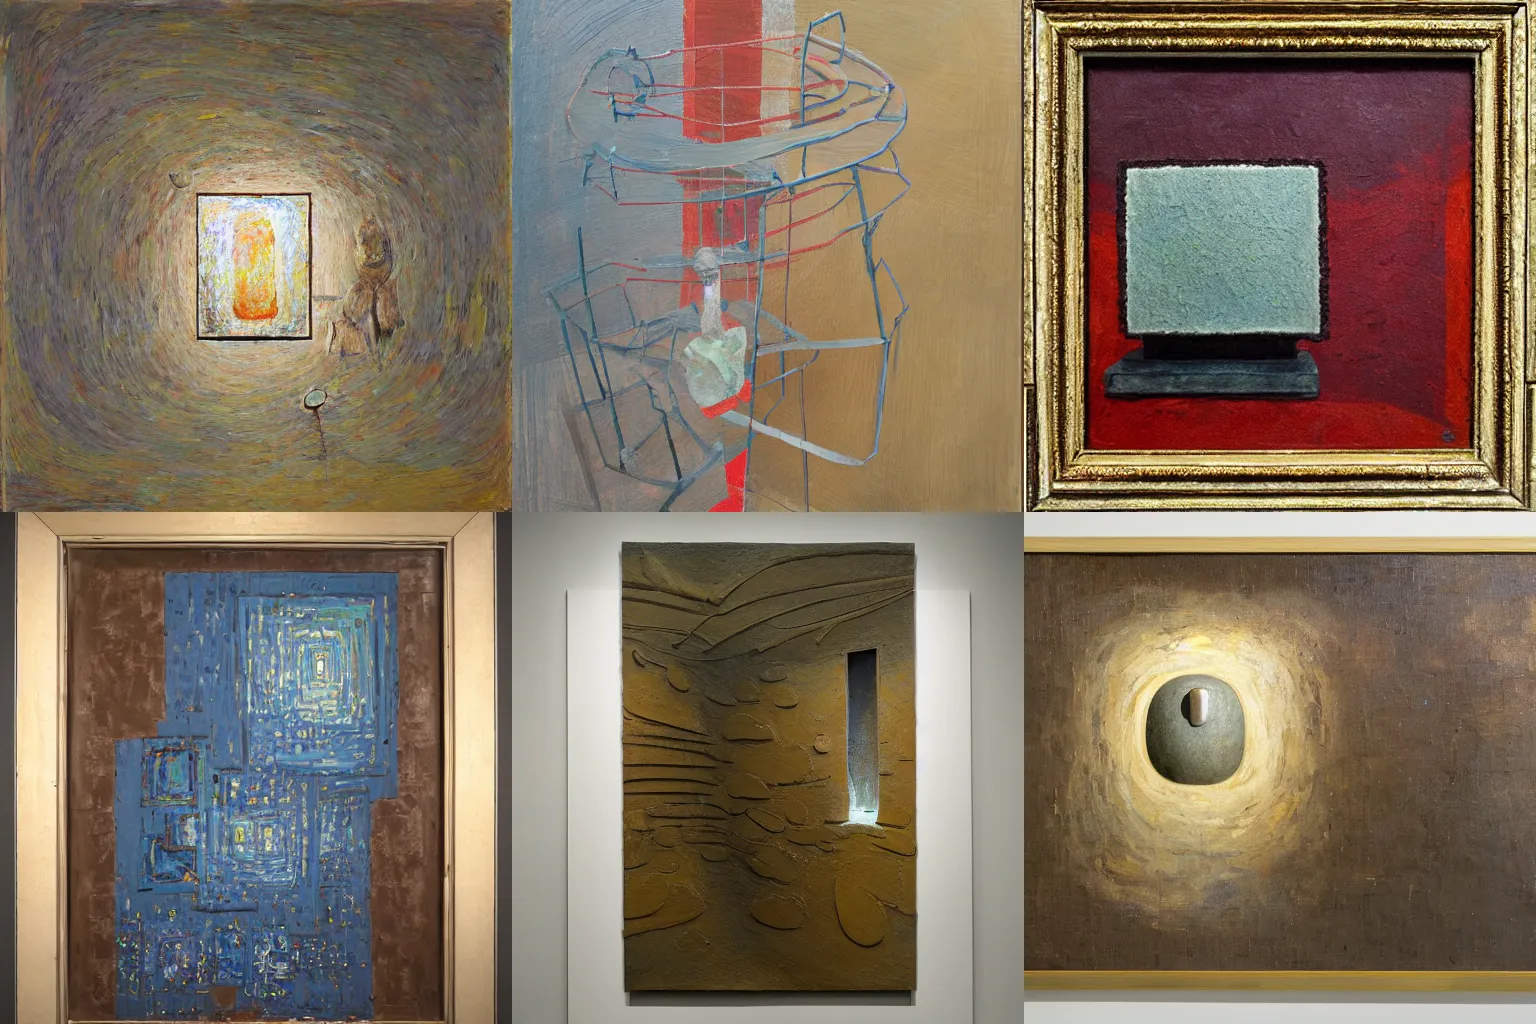 Prompt: a detailed, impasto painting by shaun tan and louise bourgeois of an abstract forgotten sculpture by ivan seal and the caretaker, frameless hospital lighting